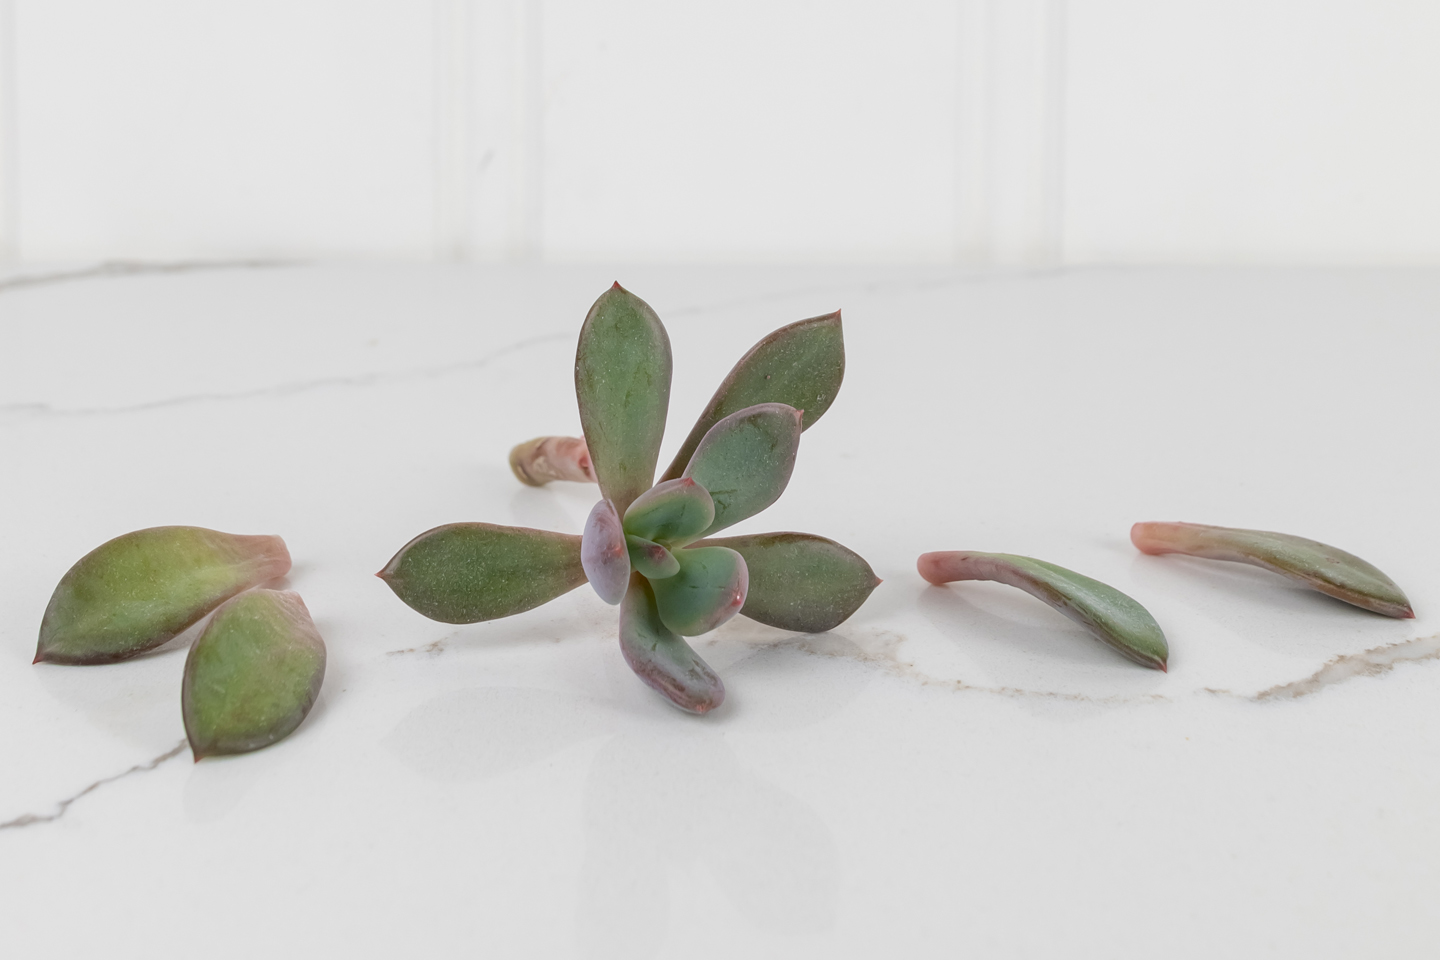 In today's post I'll share how to fix stretched succulents if your favourite succulents have started to look a little bit leggy and stretched out.